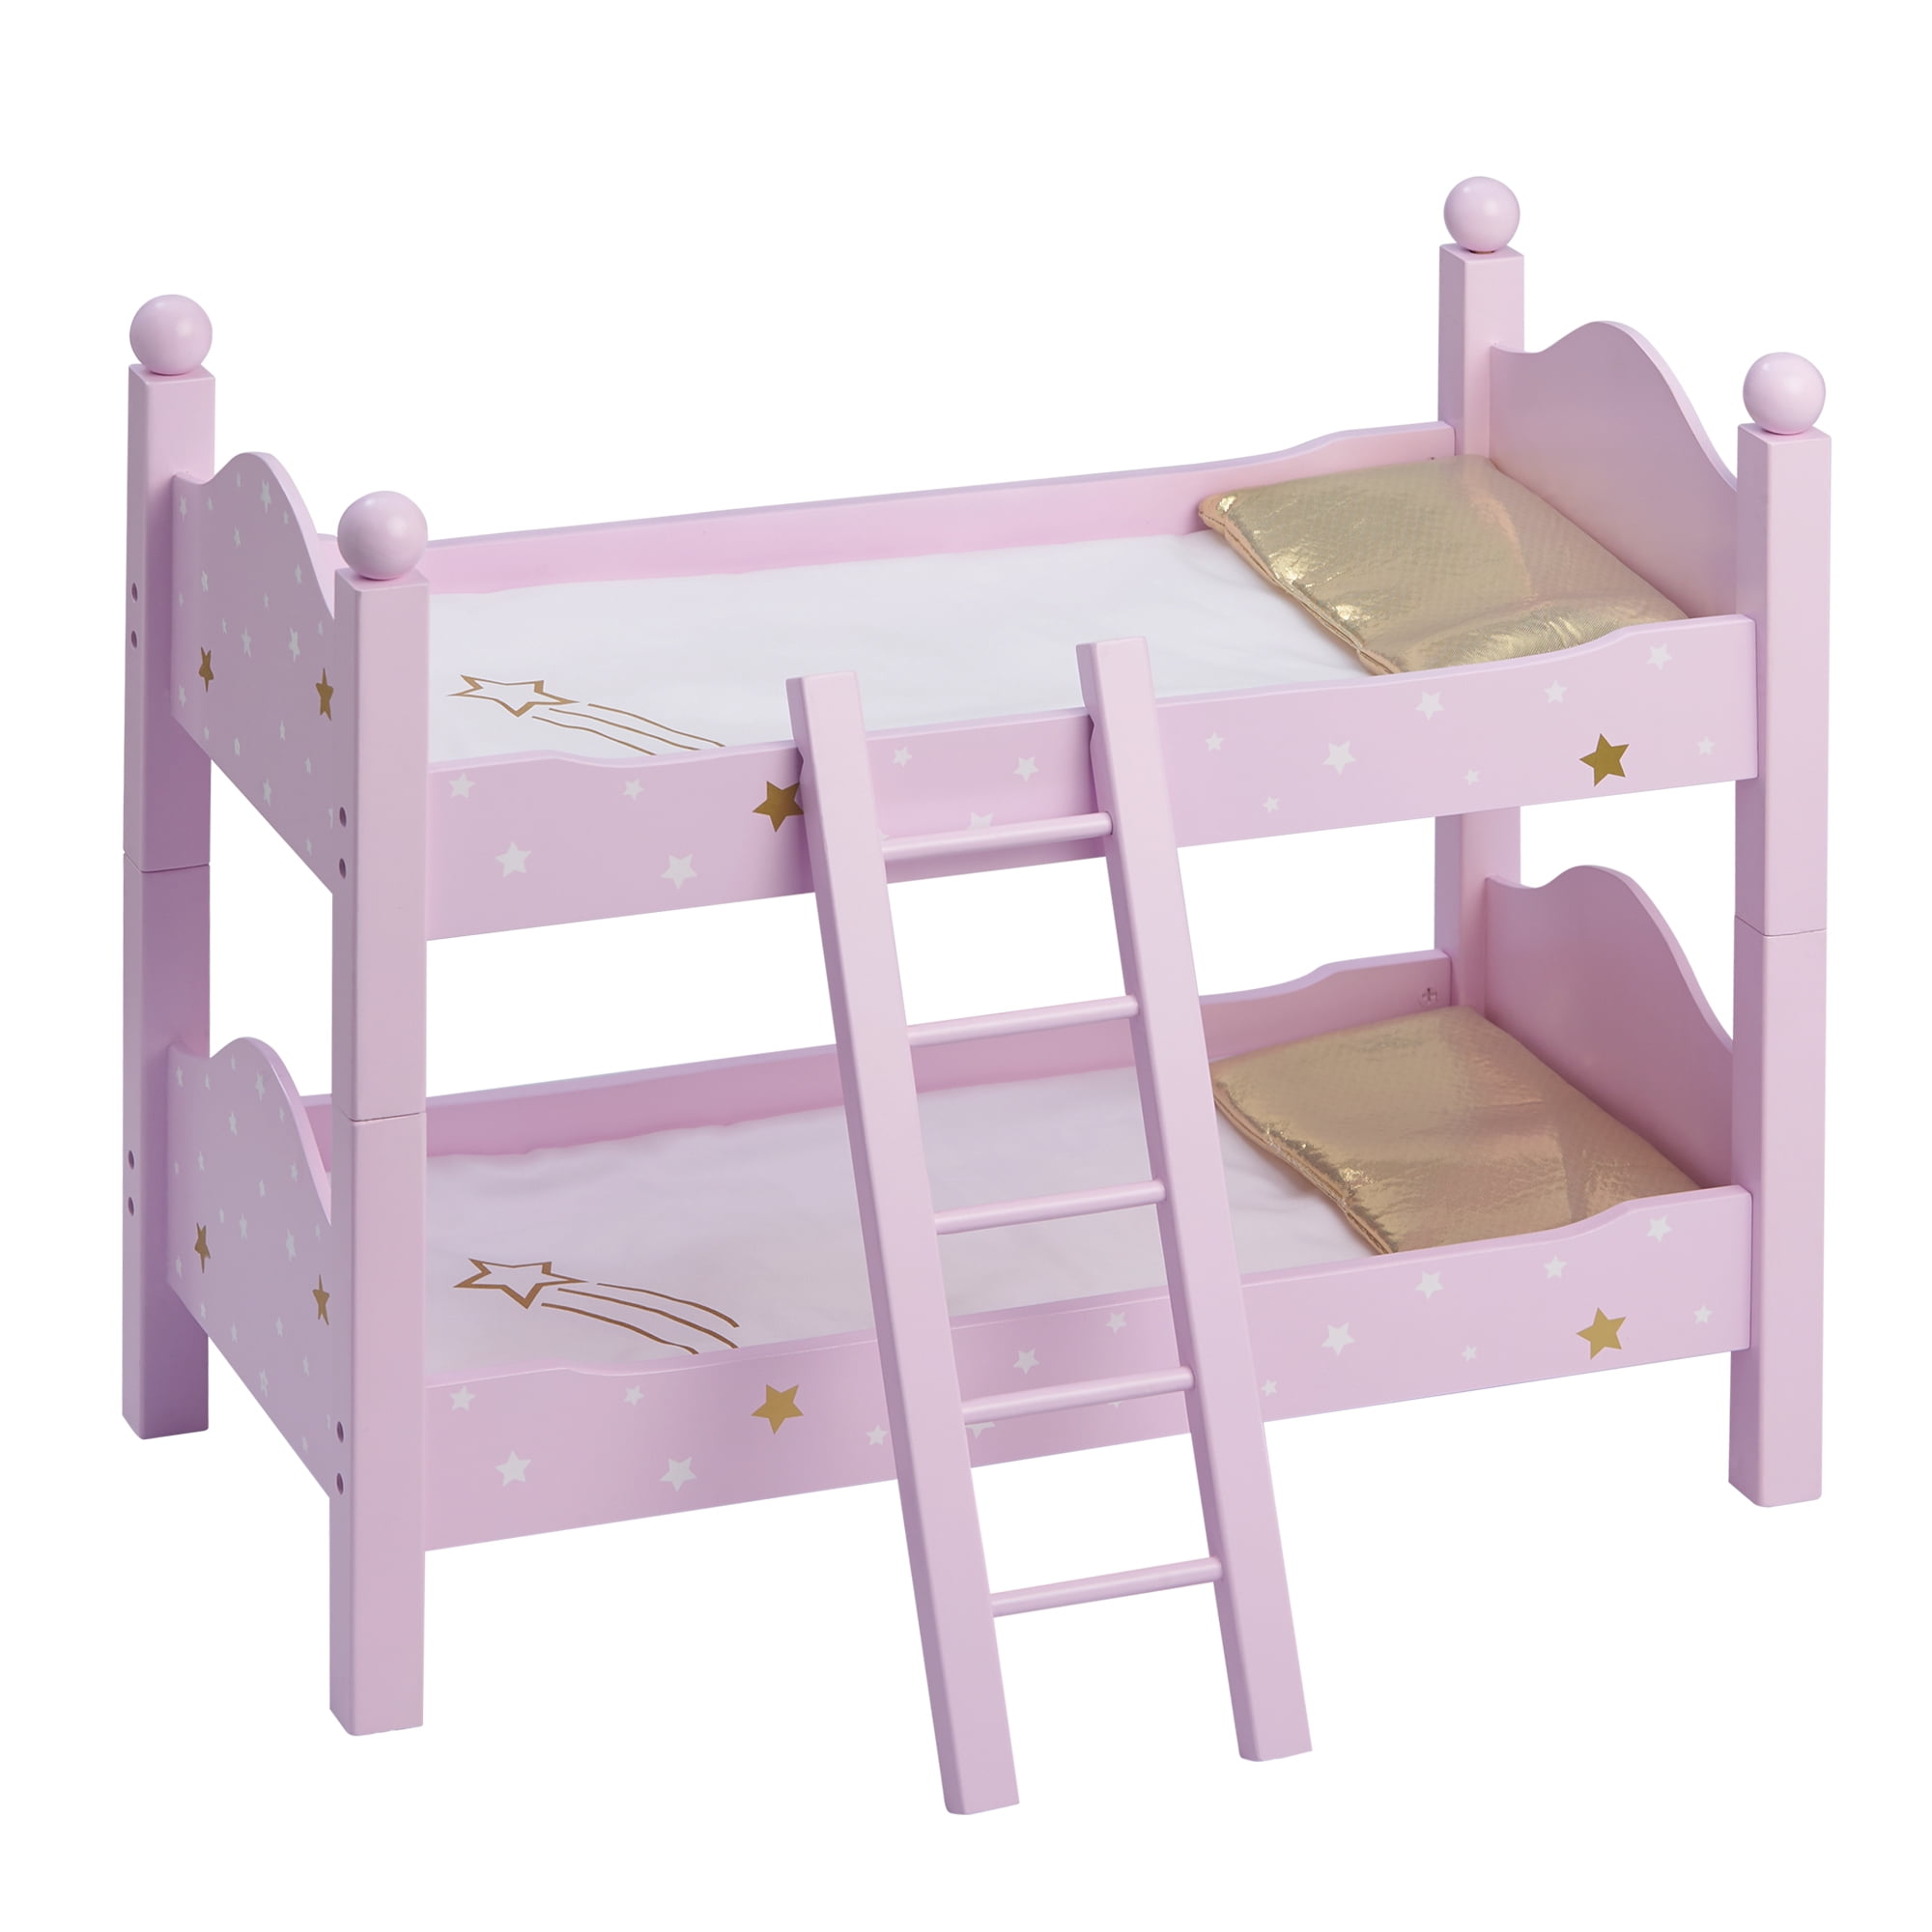 Pzas Toys Doll Bunk Bed, Bunk Bed For Twin Dolls Fits 18 Inch Dolls